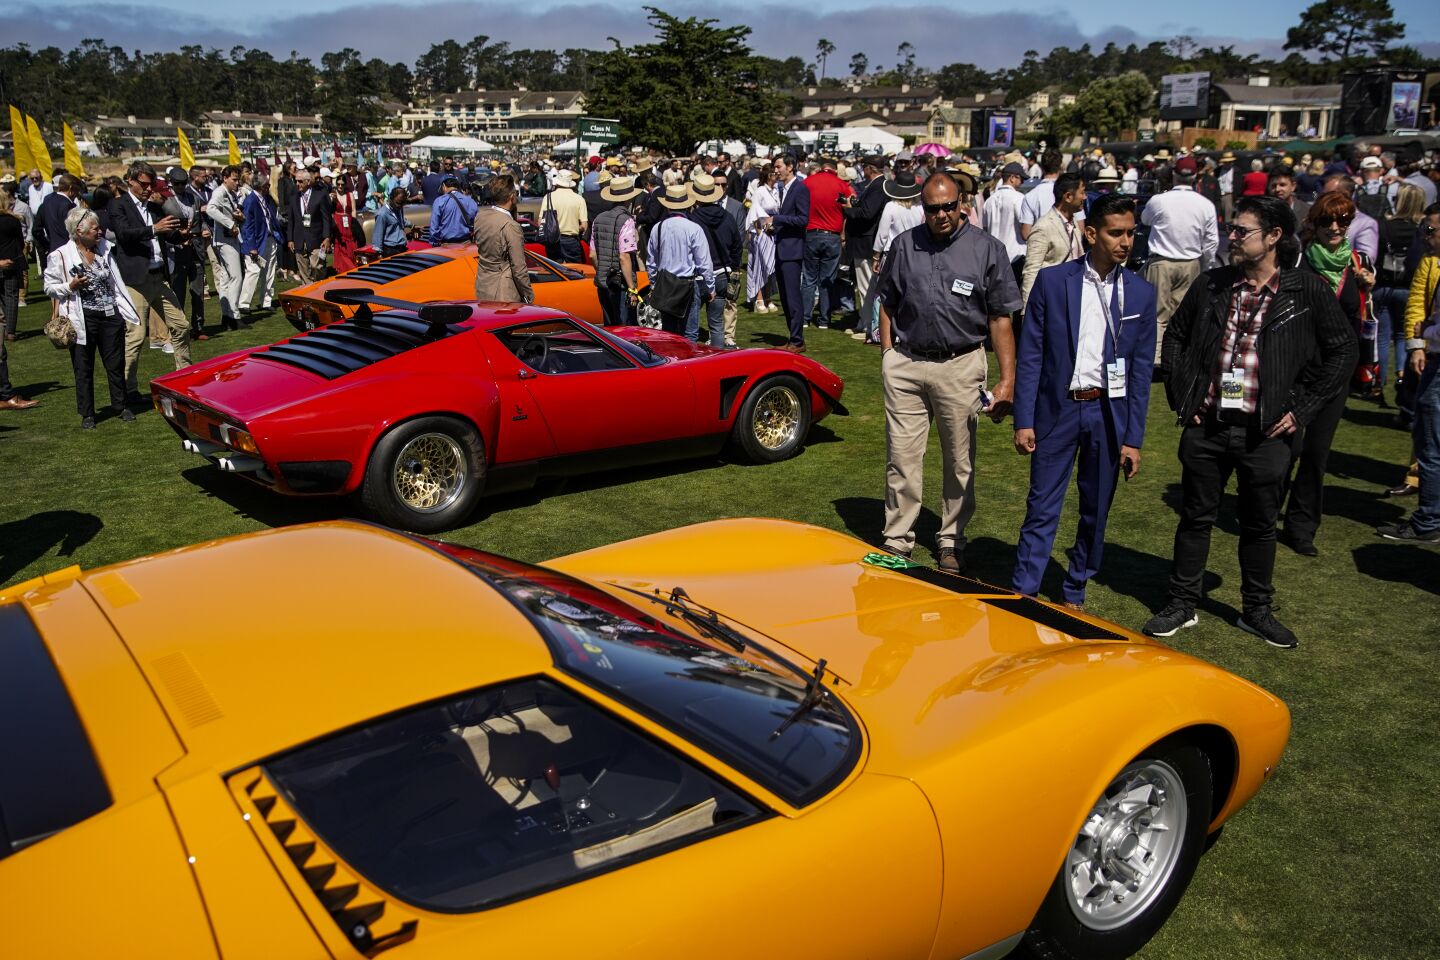 PEBBLE BEACH, CALIF. - AUGUST 18: Concours d'Elegance attendees walk among the cars in the Class N, Lamborghini Miura cars at the 69th Pebble Beach Concours d'Elegance at the Pebble Beach golf course on Sunday, Aug. 18, 2019 in Pebble Beach, Calif. (Kent Nishimura / Los Angeles Times)